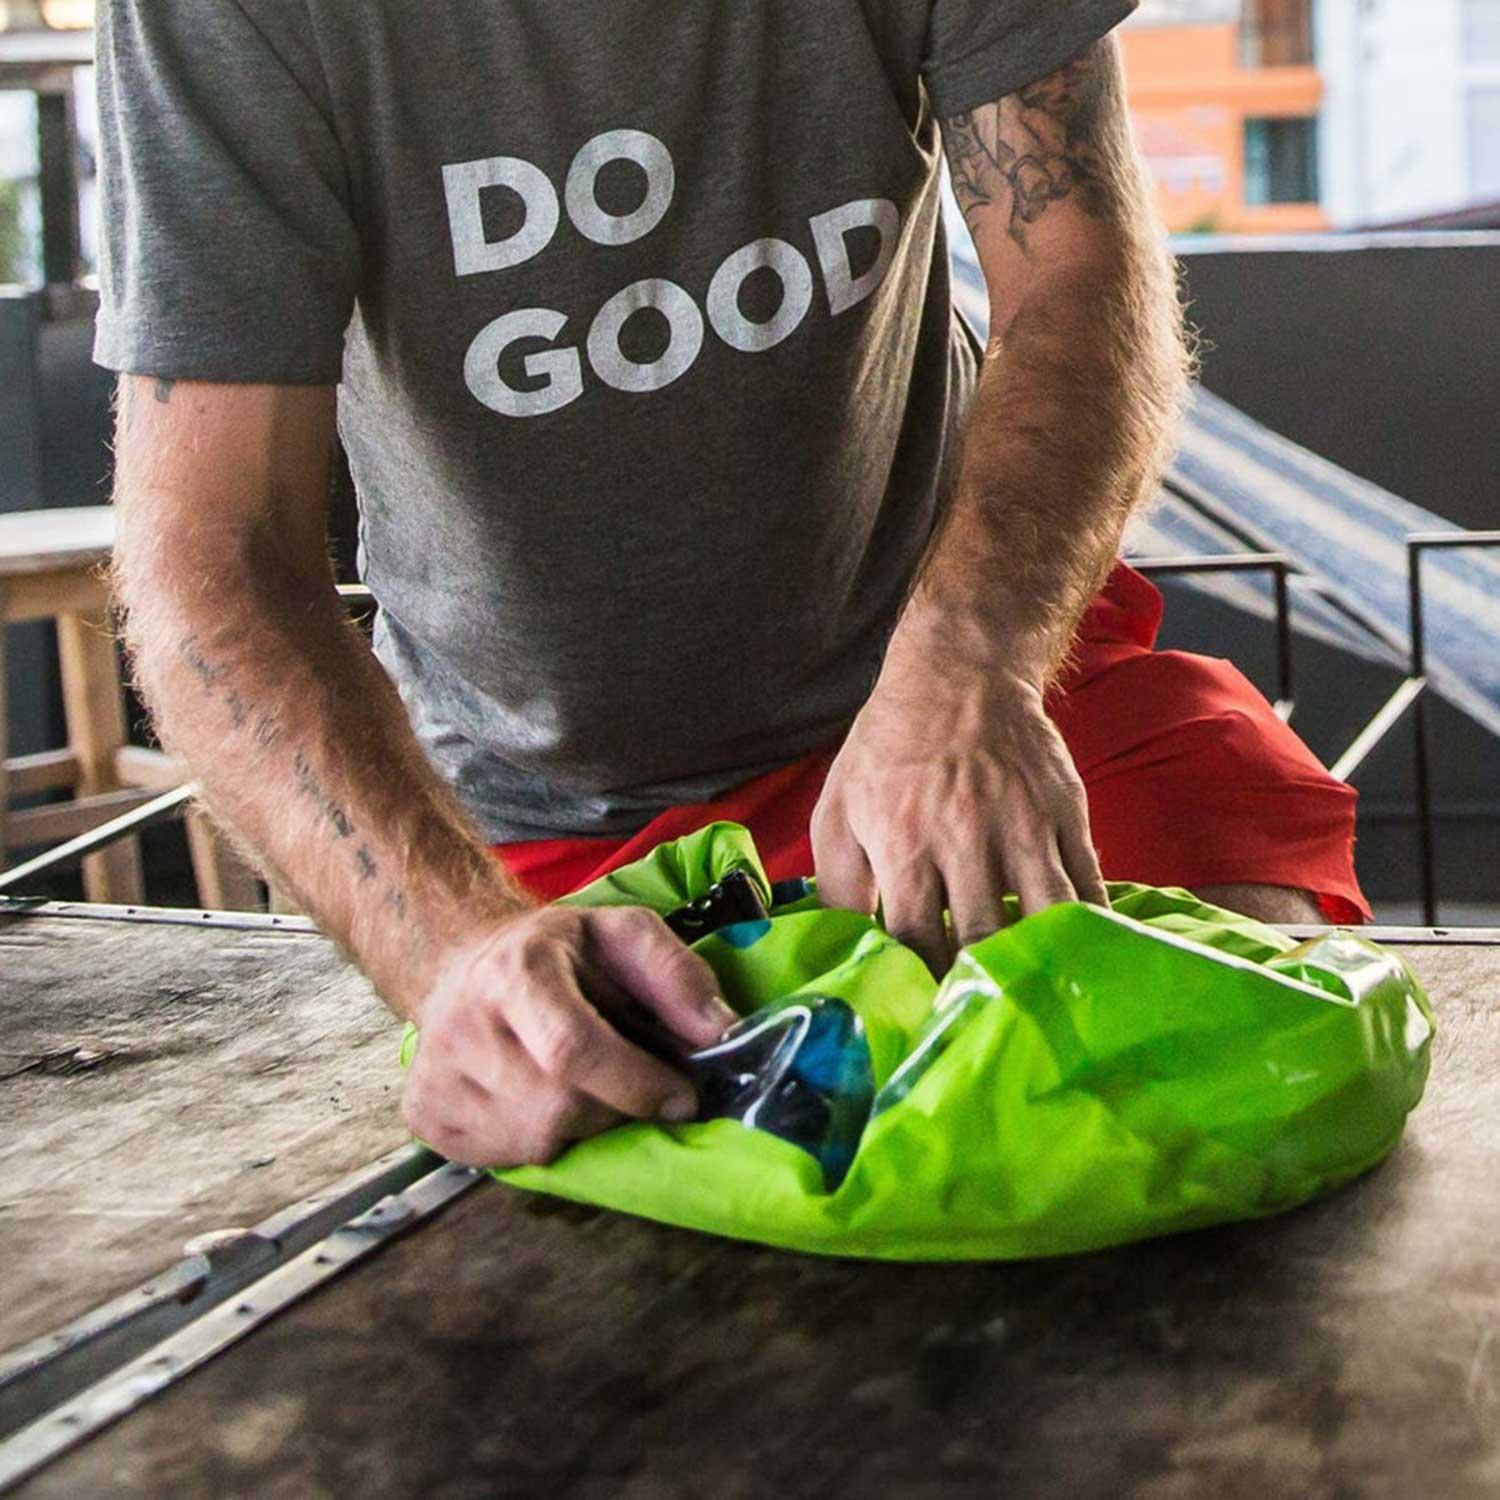 The Scrubba Wash Bag Cleans Clothes in 3 Minutes